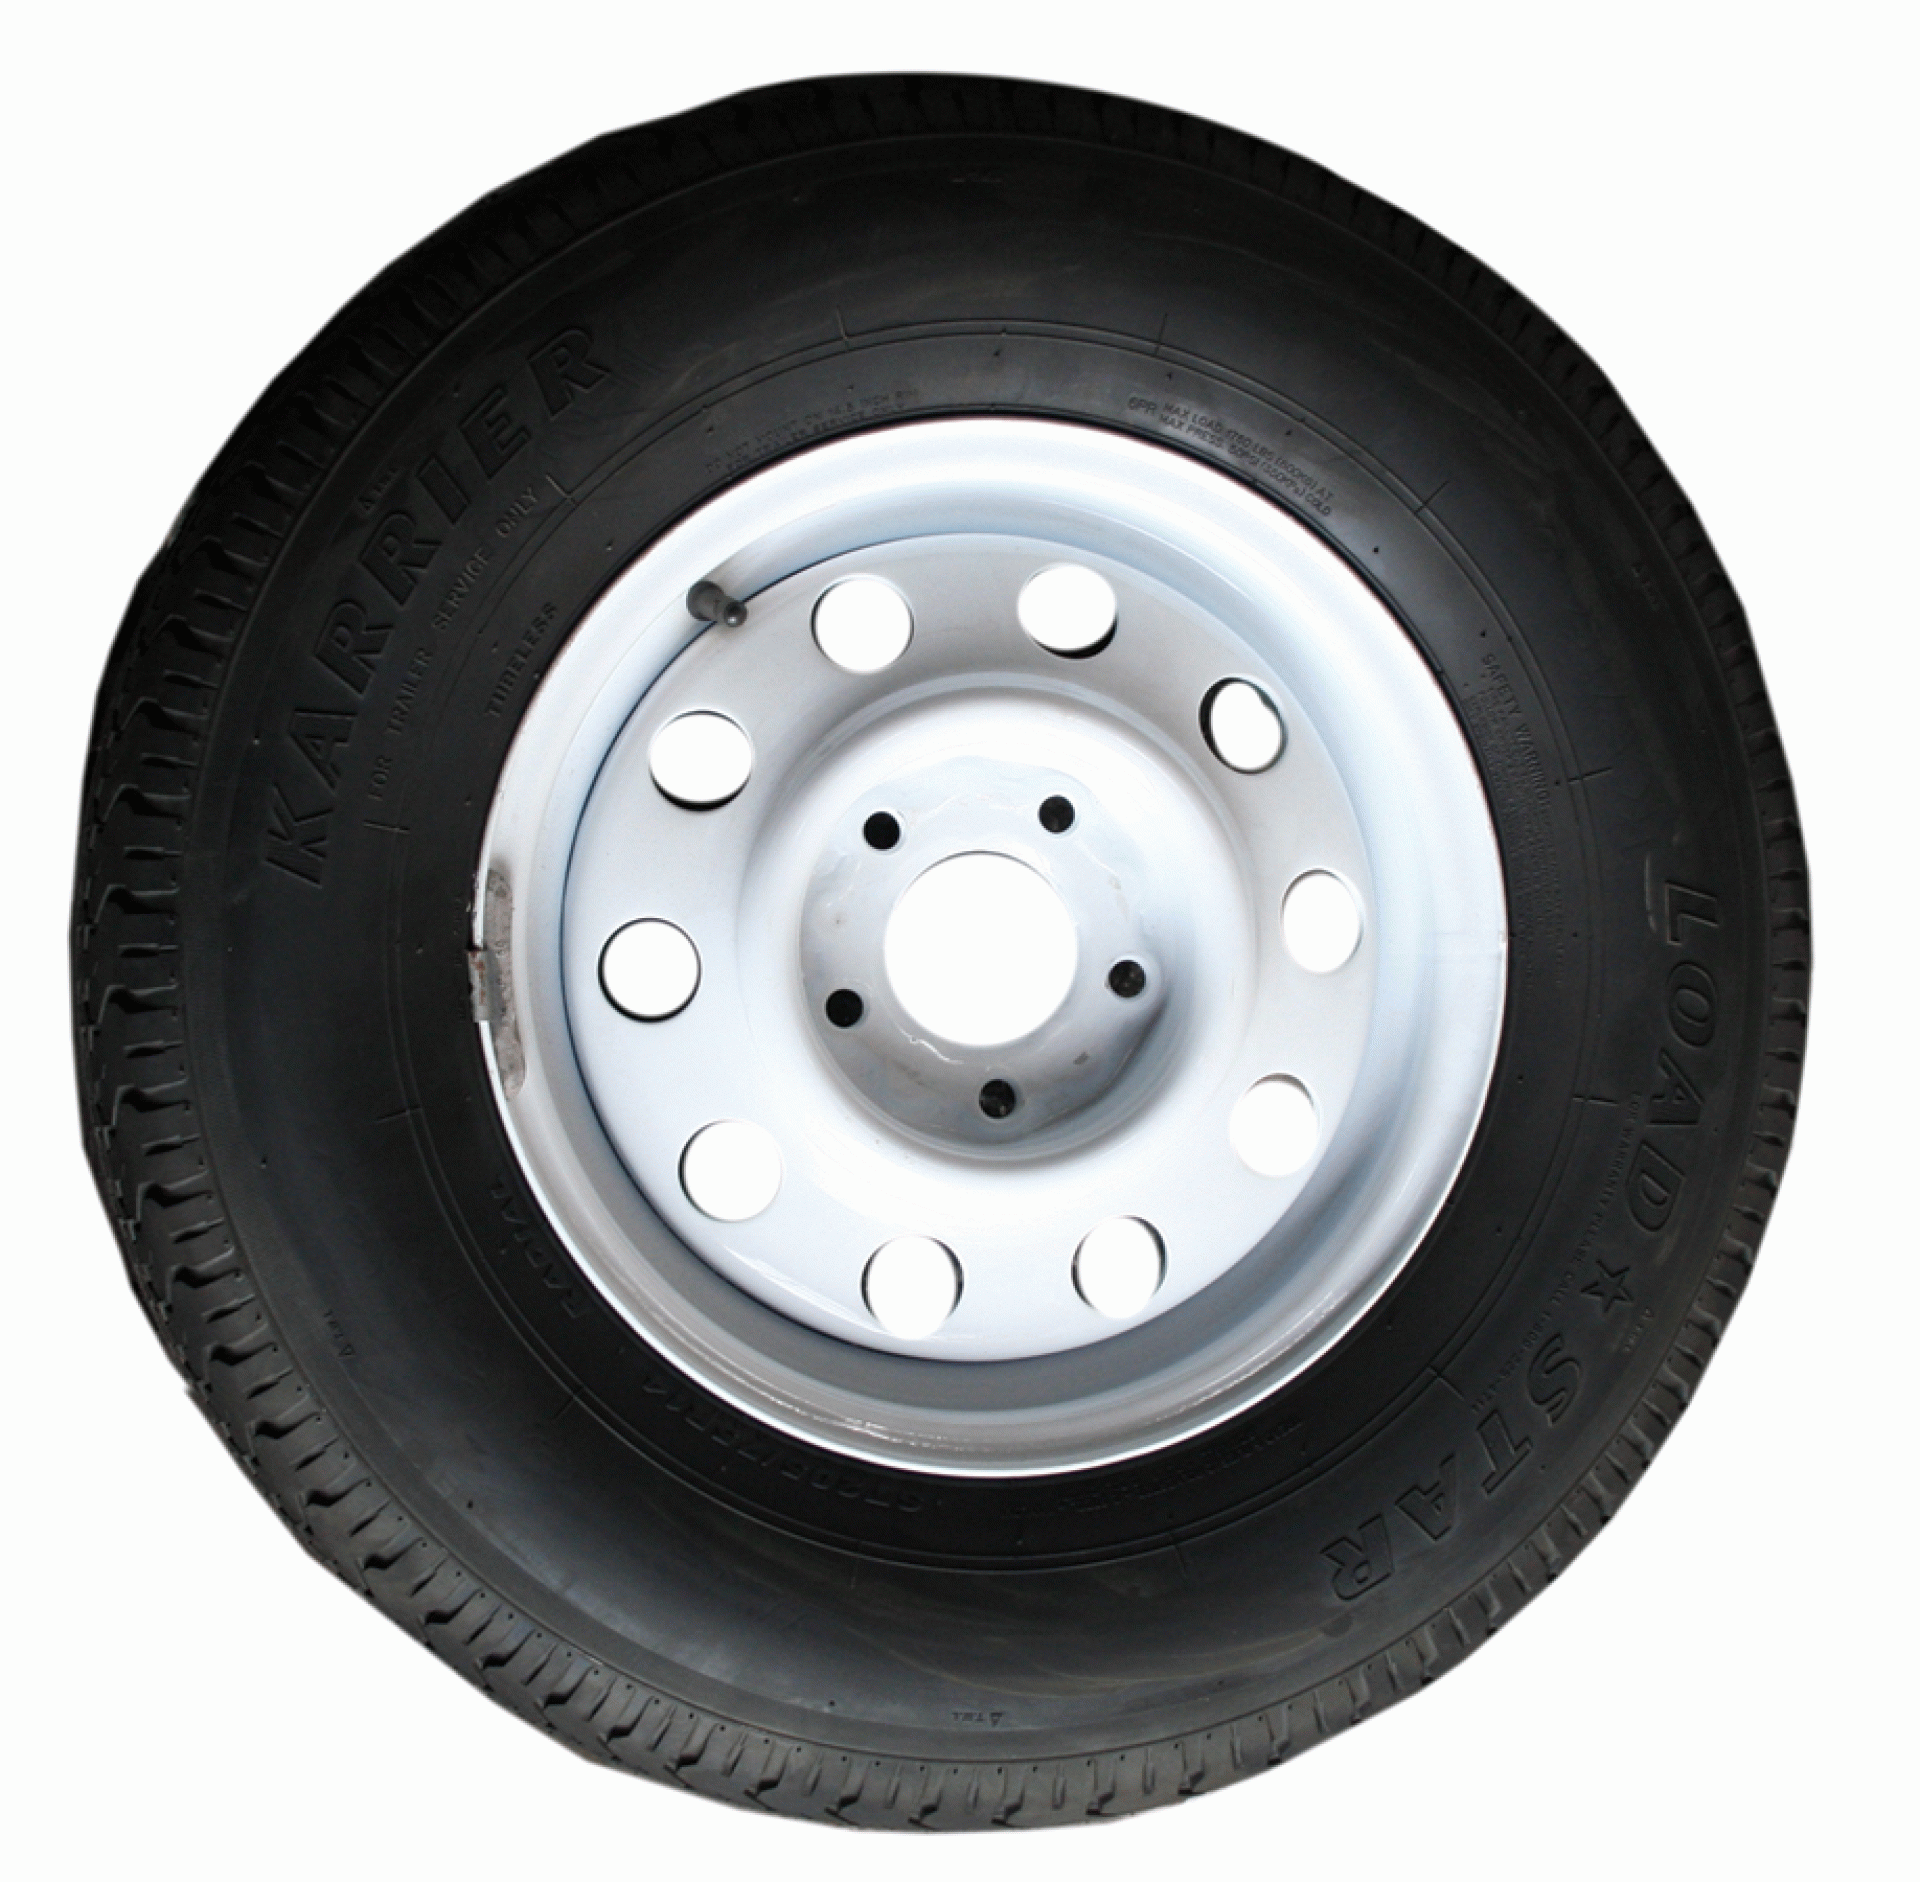 Demco | 5965 | Tire and wheel ST205/75R14 With White Pinstriping Rim For Tow It 2 Kar Kaddy 3